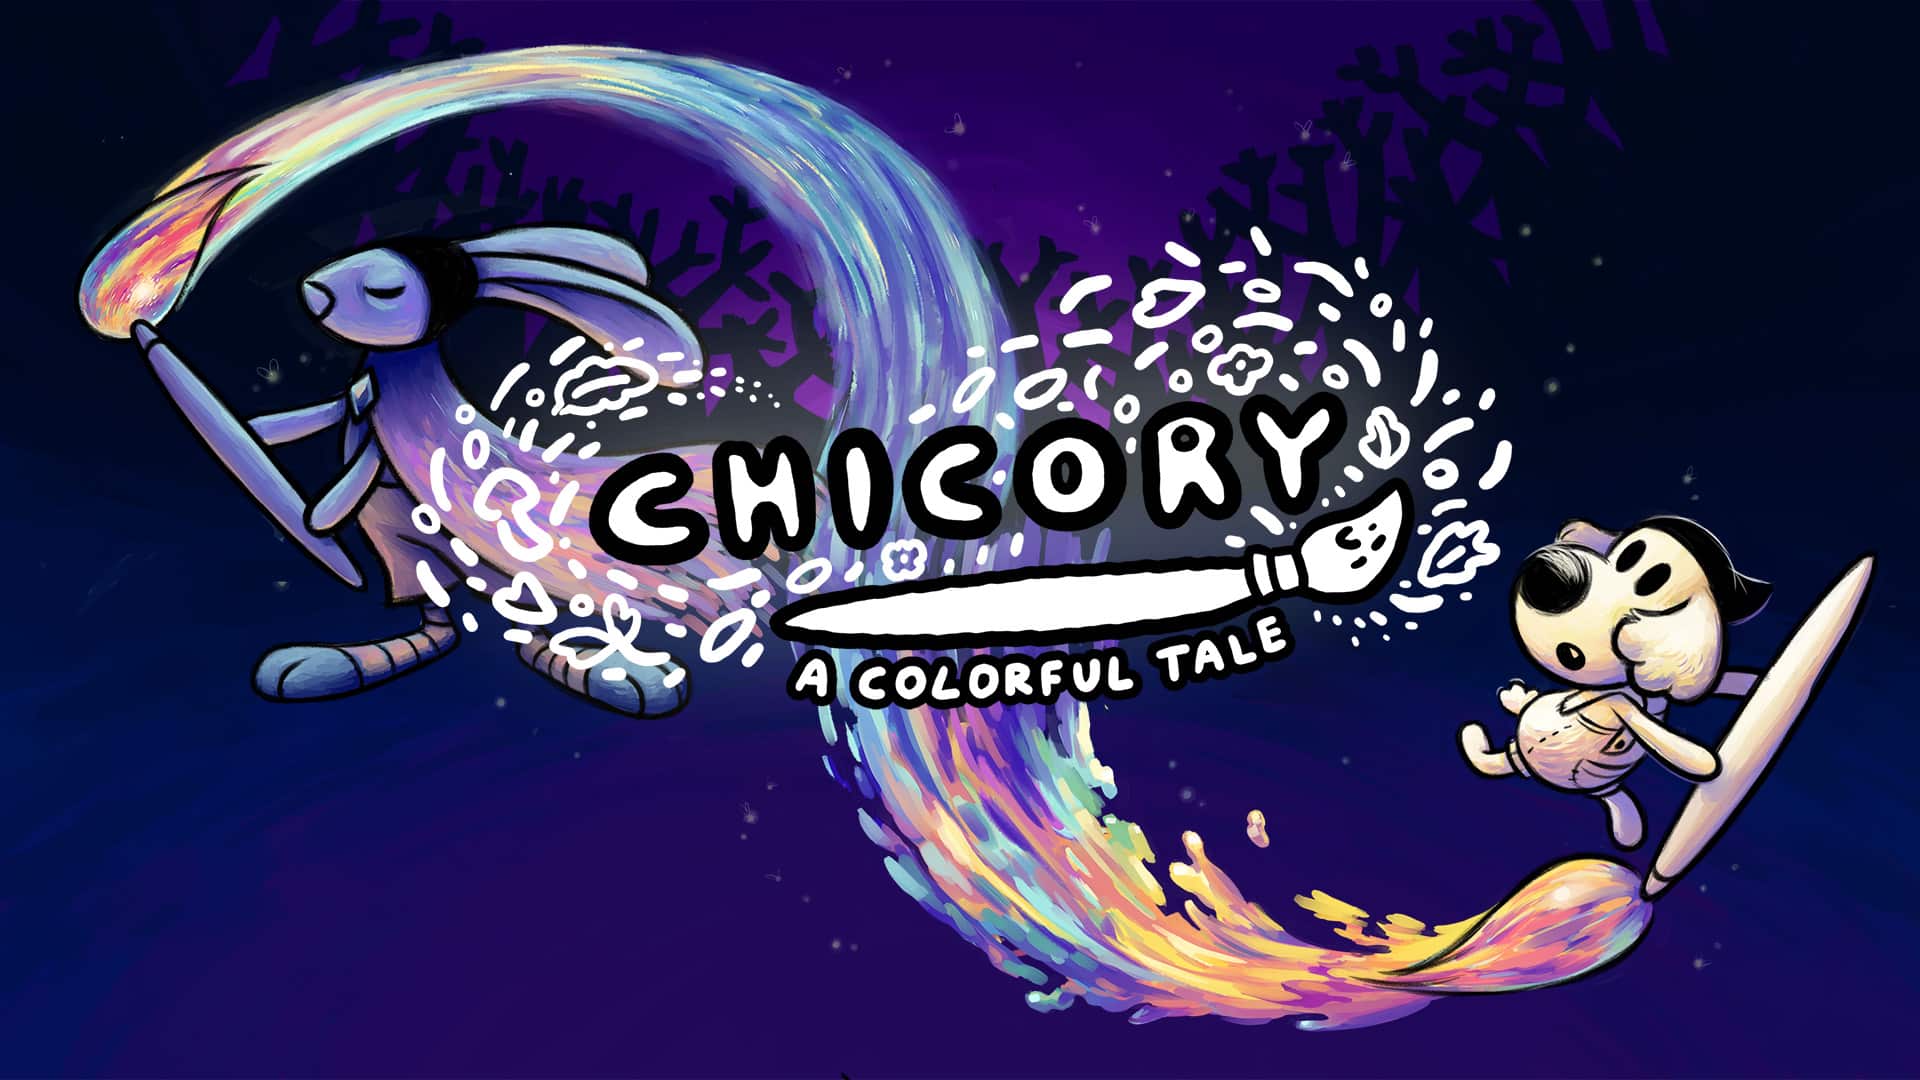 chicory a colorful tale physical